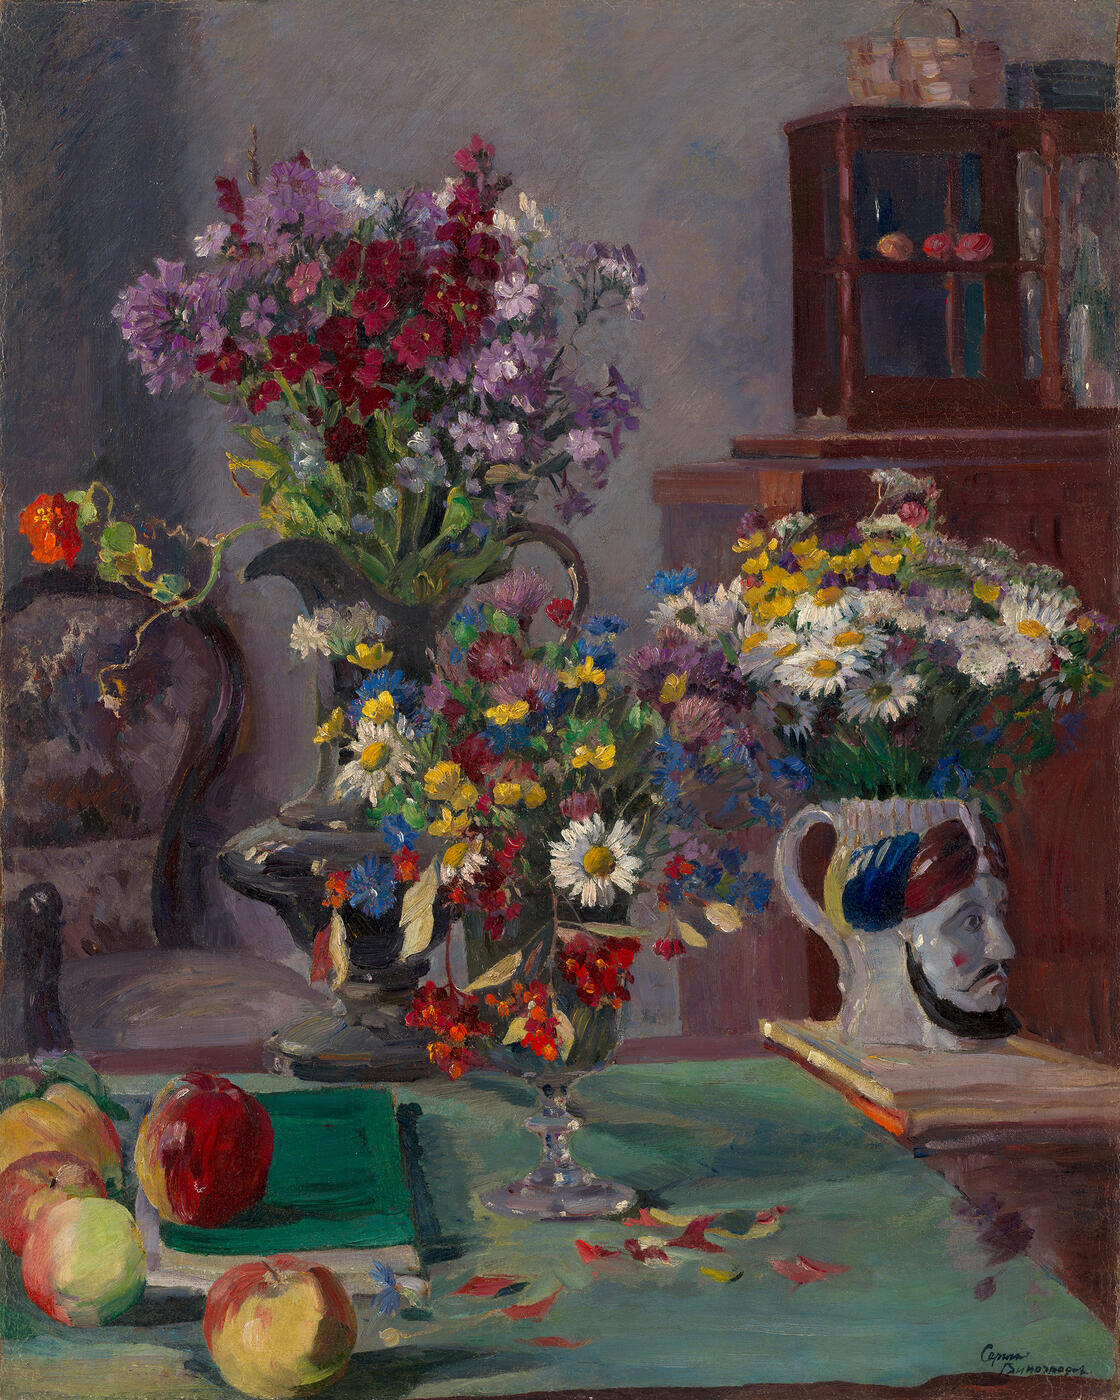 Still Life with Wildflowers